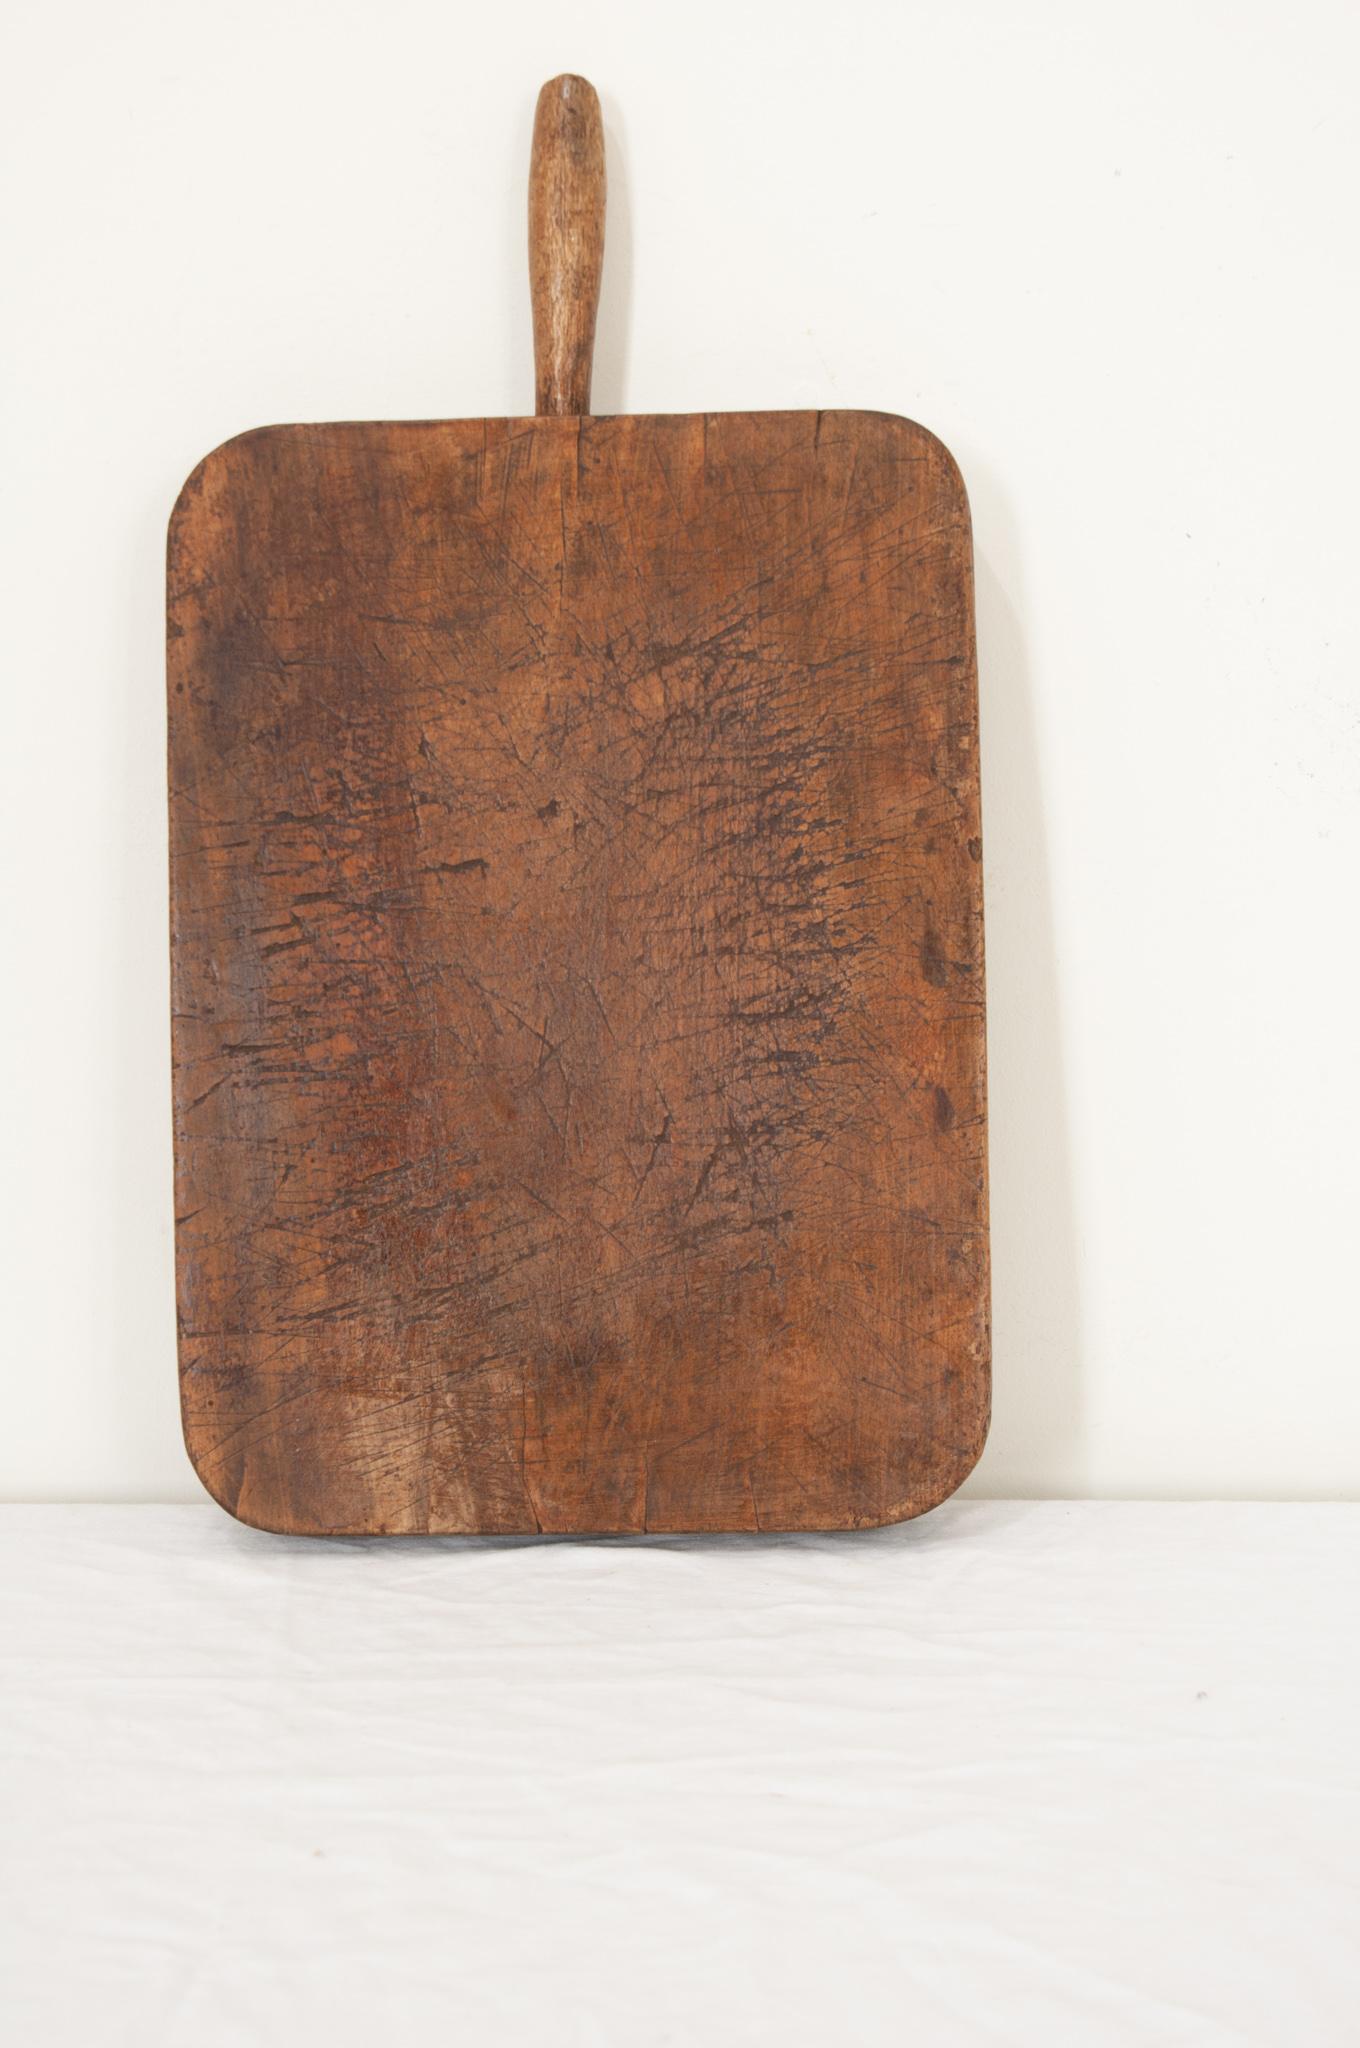 A large solid wood cutting board from France in a rectangle shape with smooth corners and a handle. The worn board is made of a single piece of wood. Knife marks and scrapes that were left by cooks, now long gone, can be seen and felt as if they